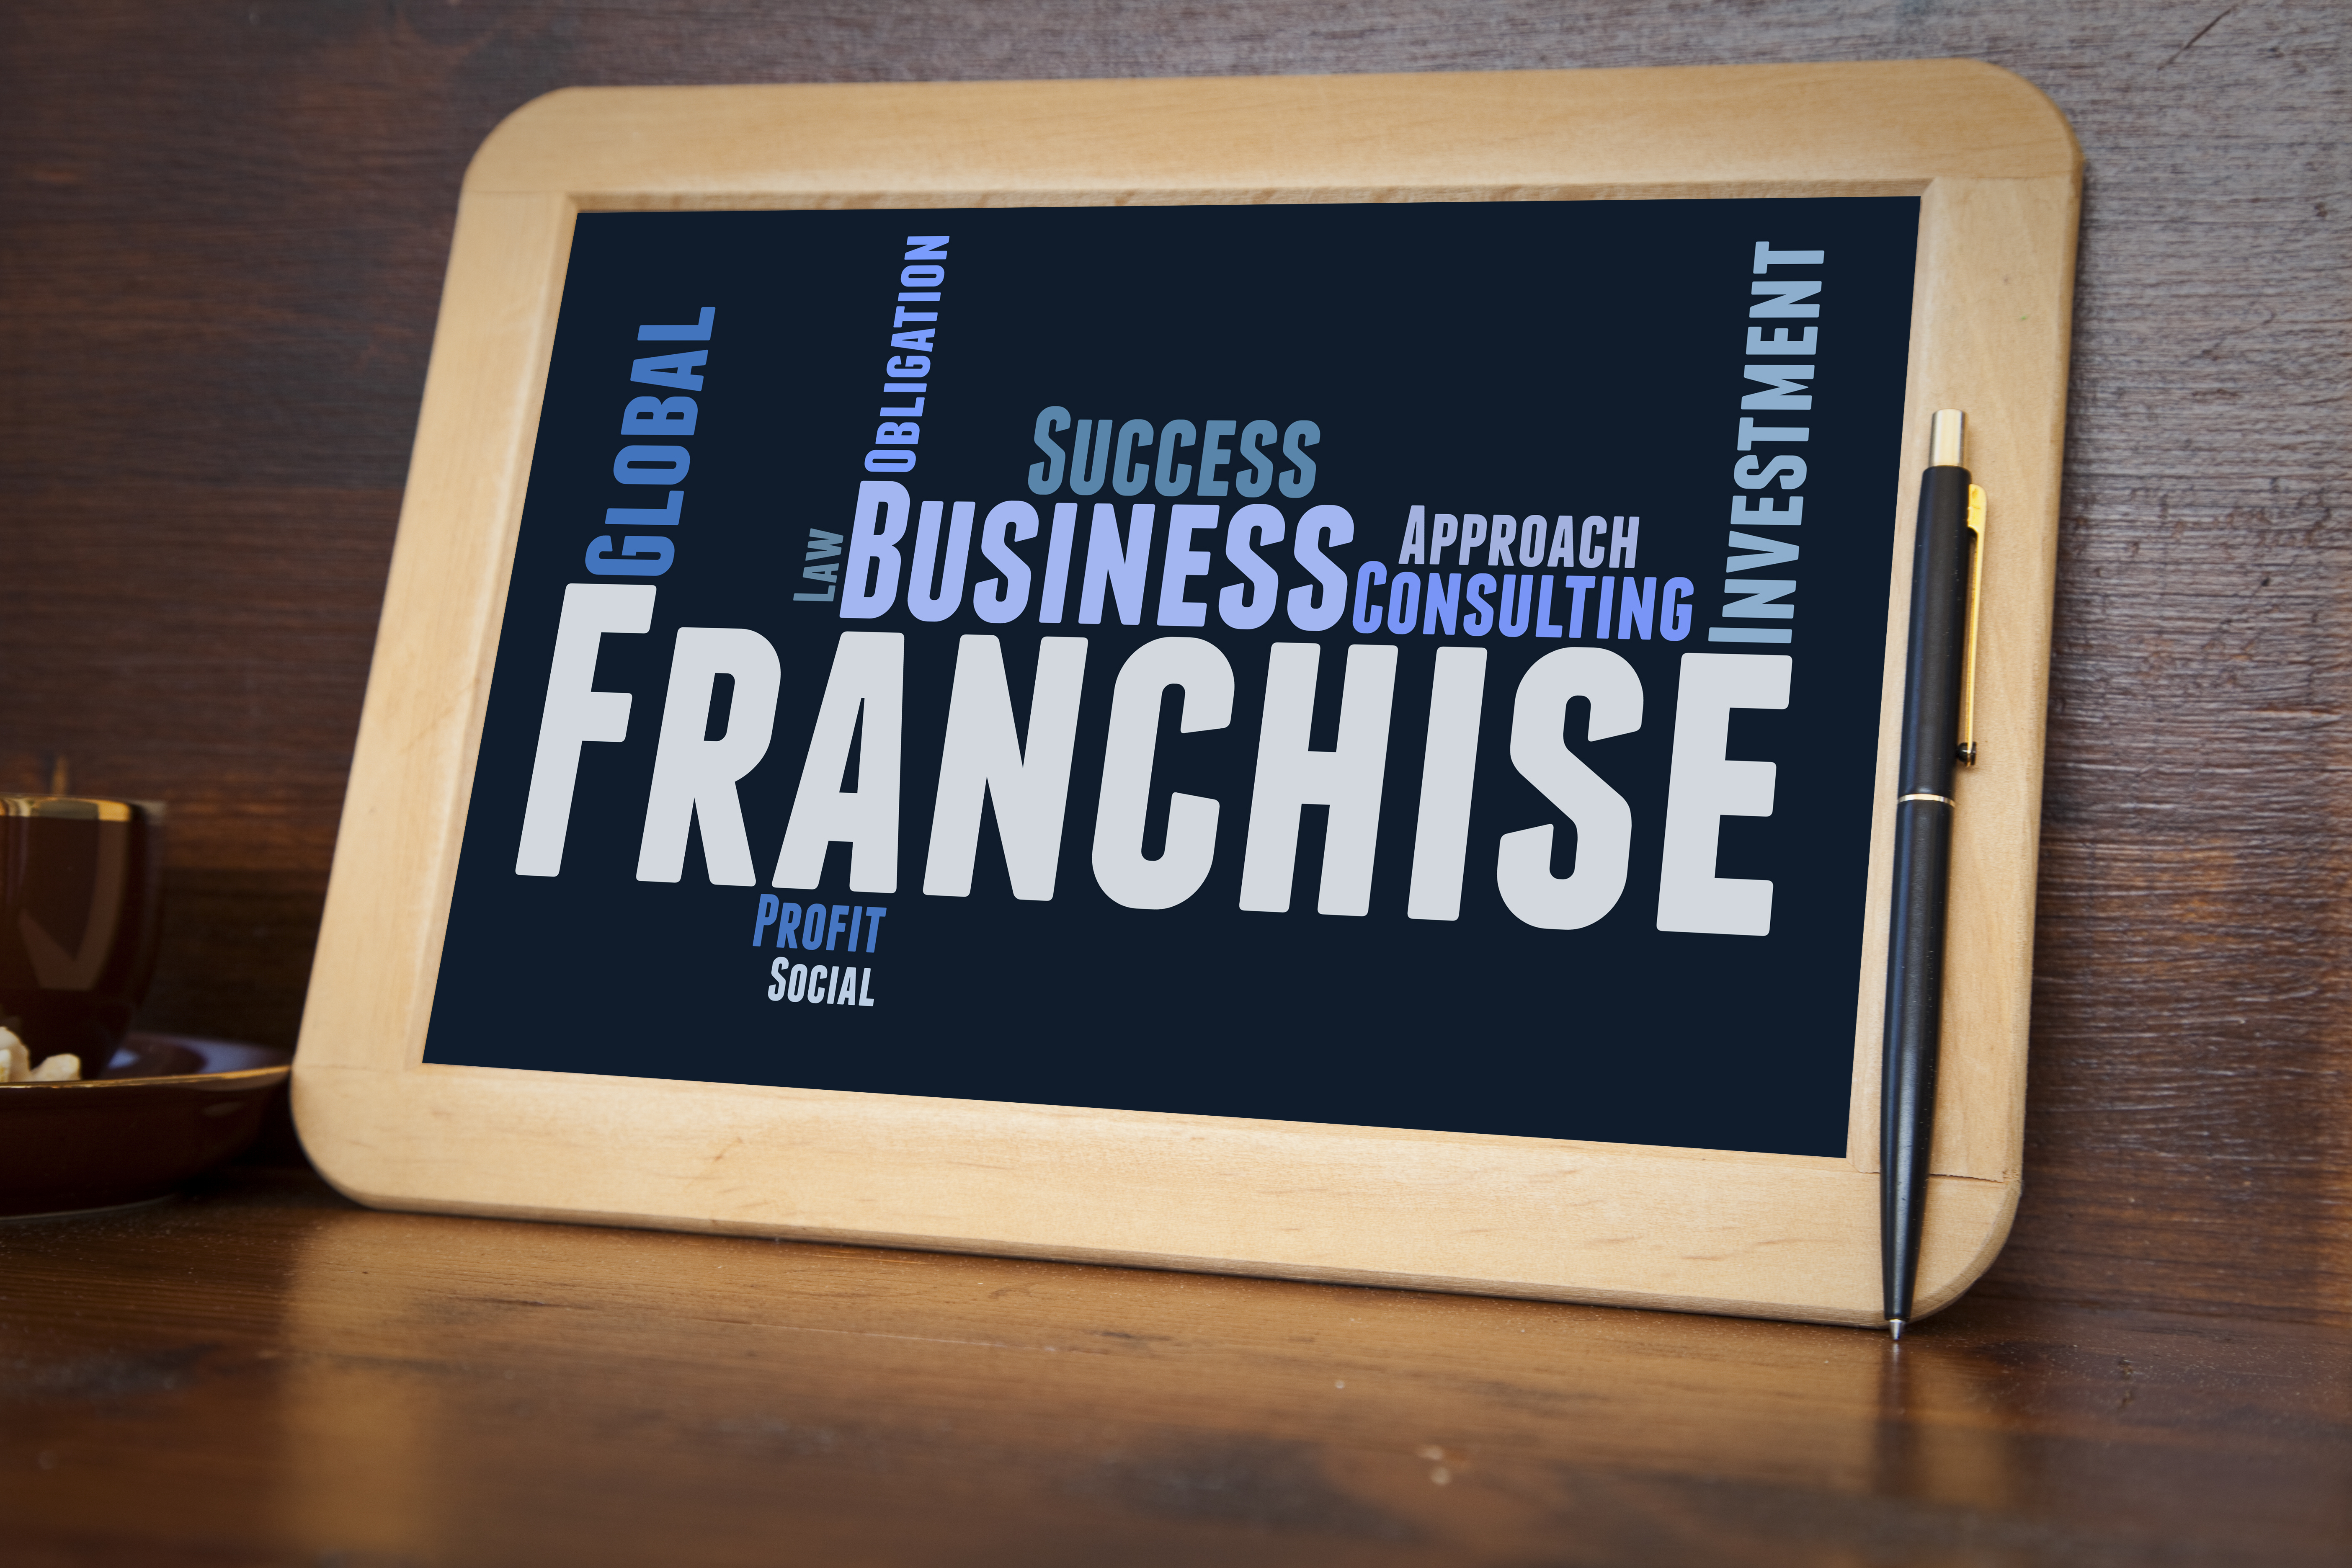 Franchising with us